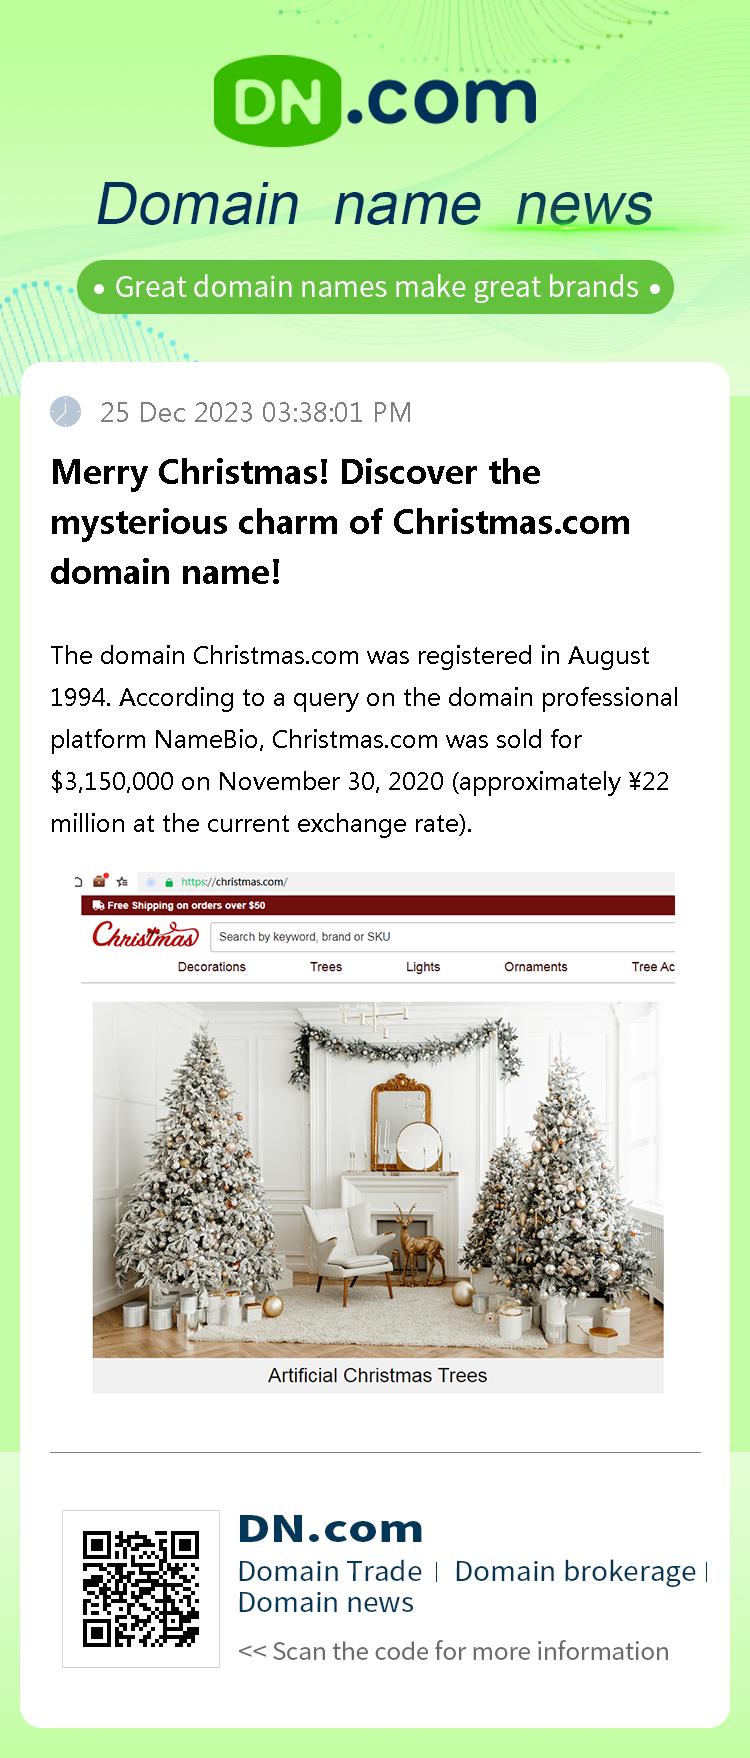 Merry Christmas! Discover the mysterious charm of Christmas.com domain name!